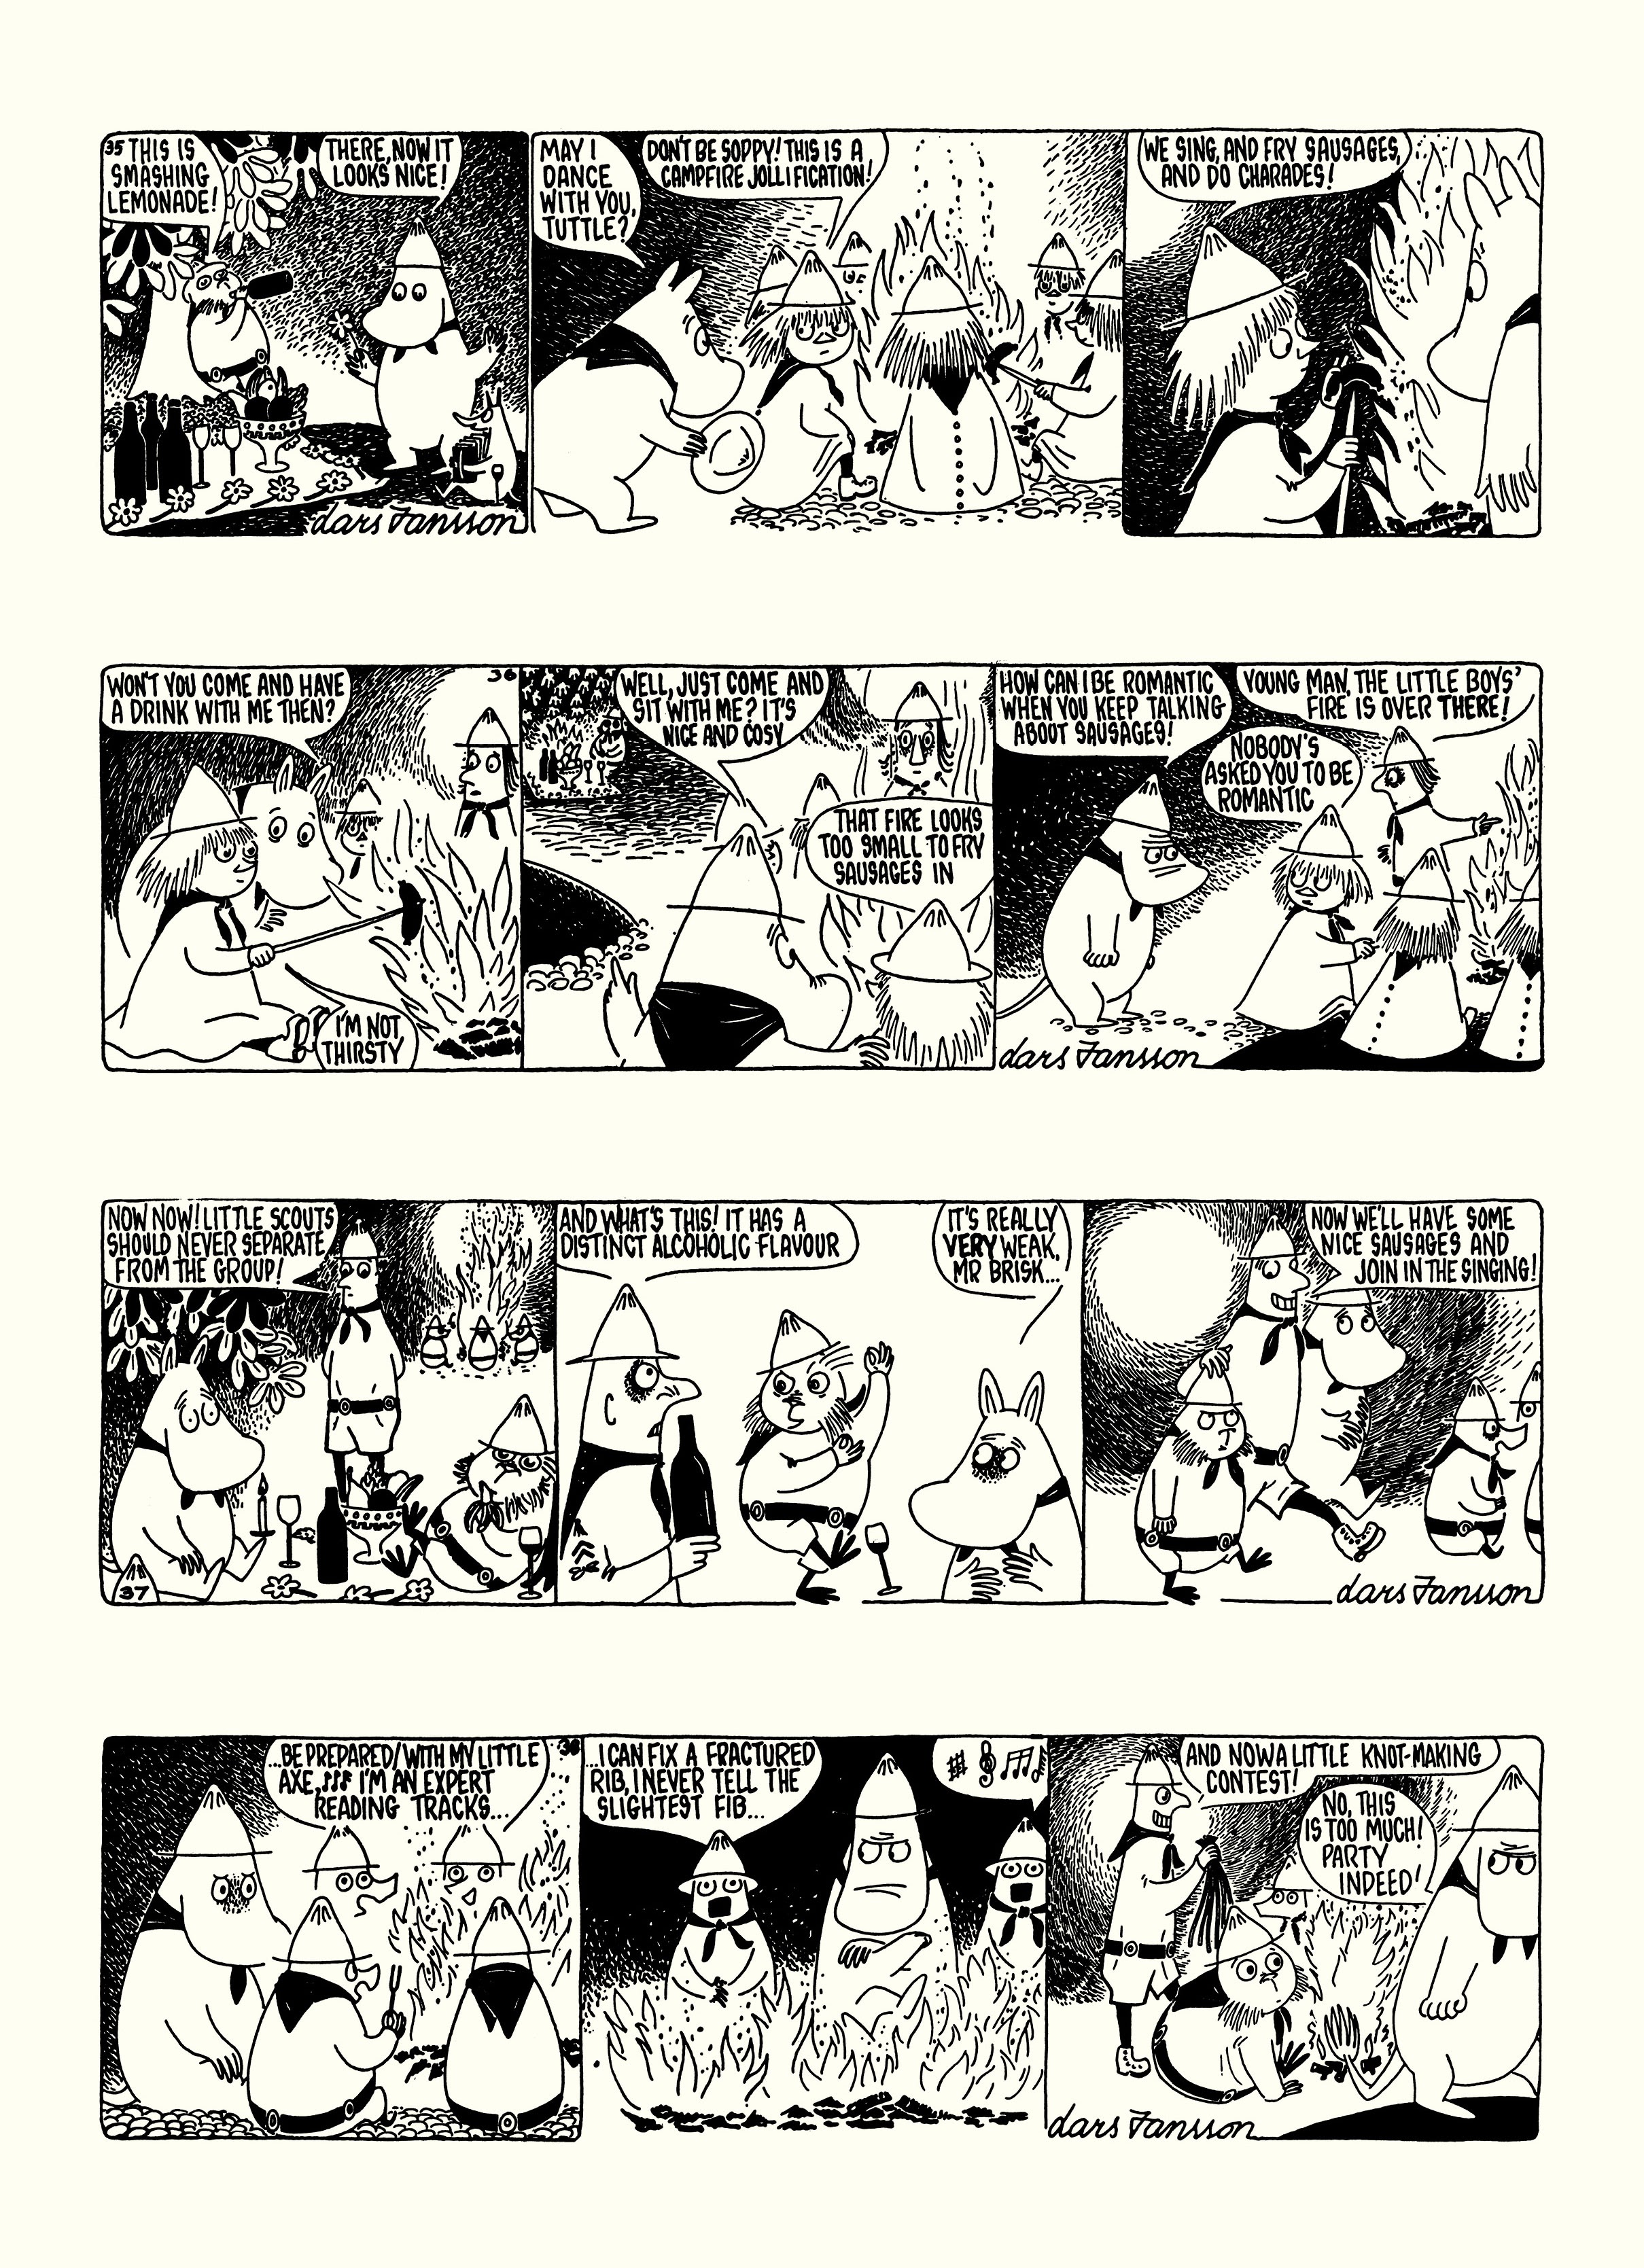 Read online Moomin: The Complete Lars Jansson Comic Strip comic -  Issue # TPB 7 - 36